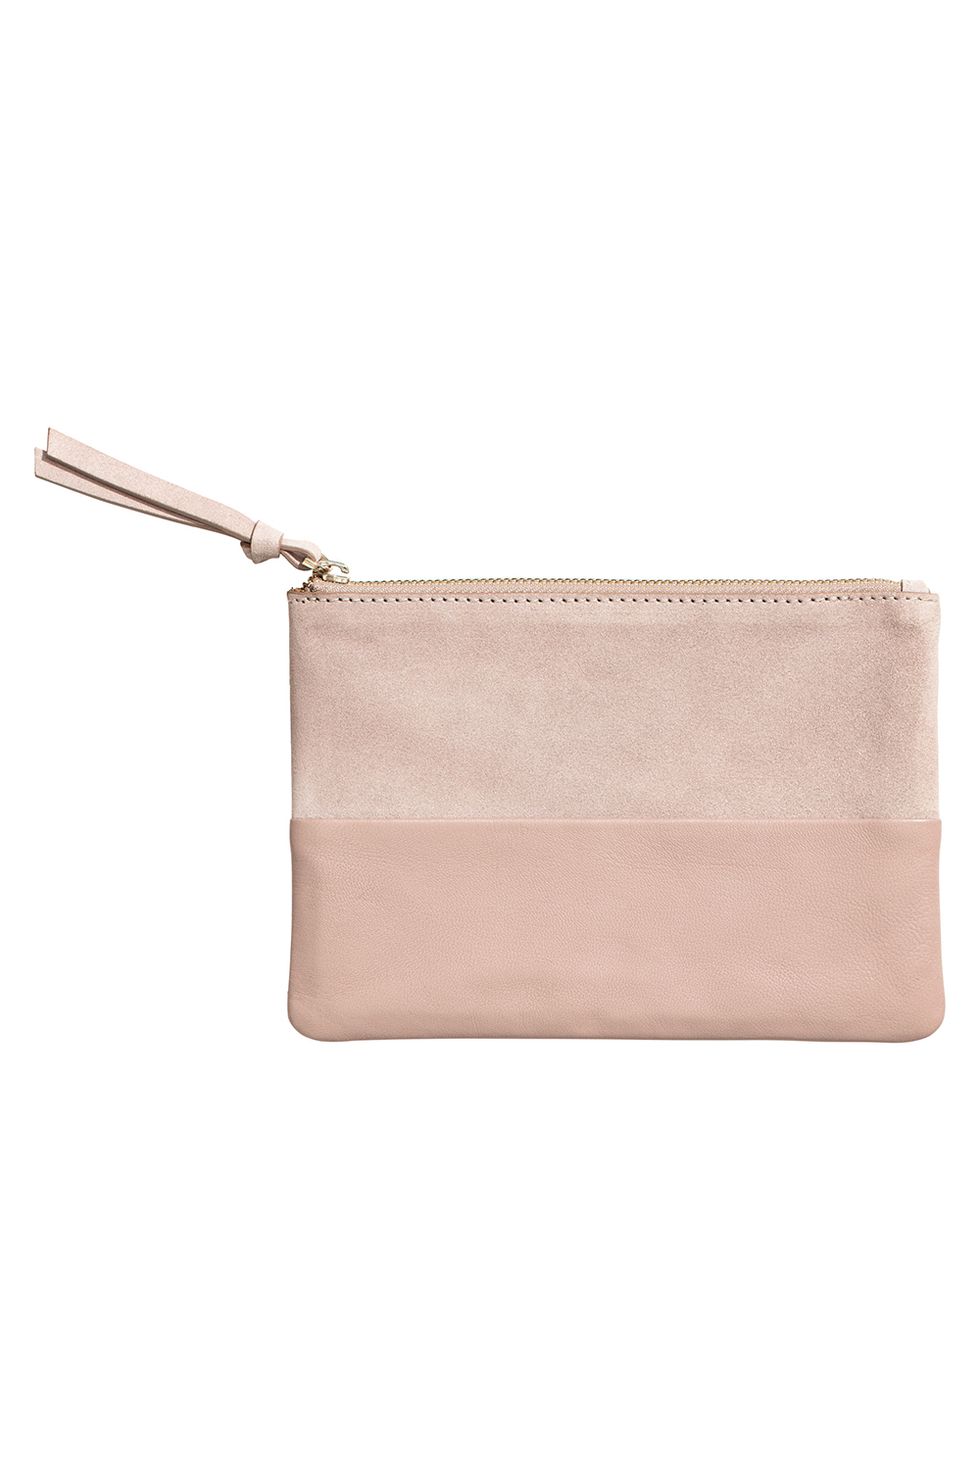 Wallet, Pink, Beige, Coin purse, Brown, Leather, Fashion accessory, Rectangle, Bag, Handbag, 